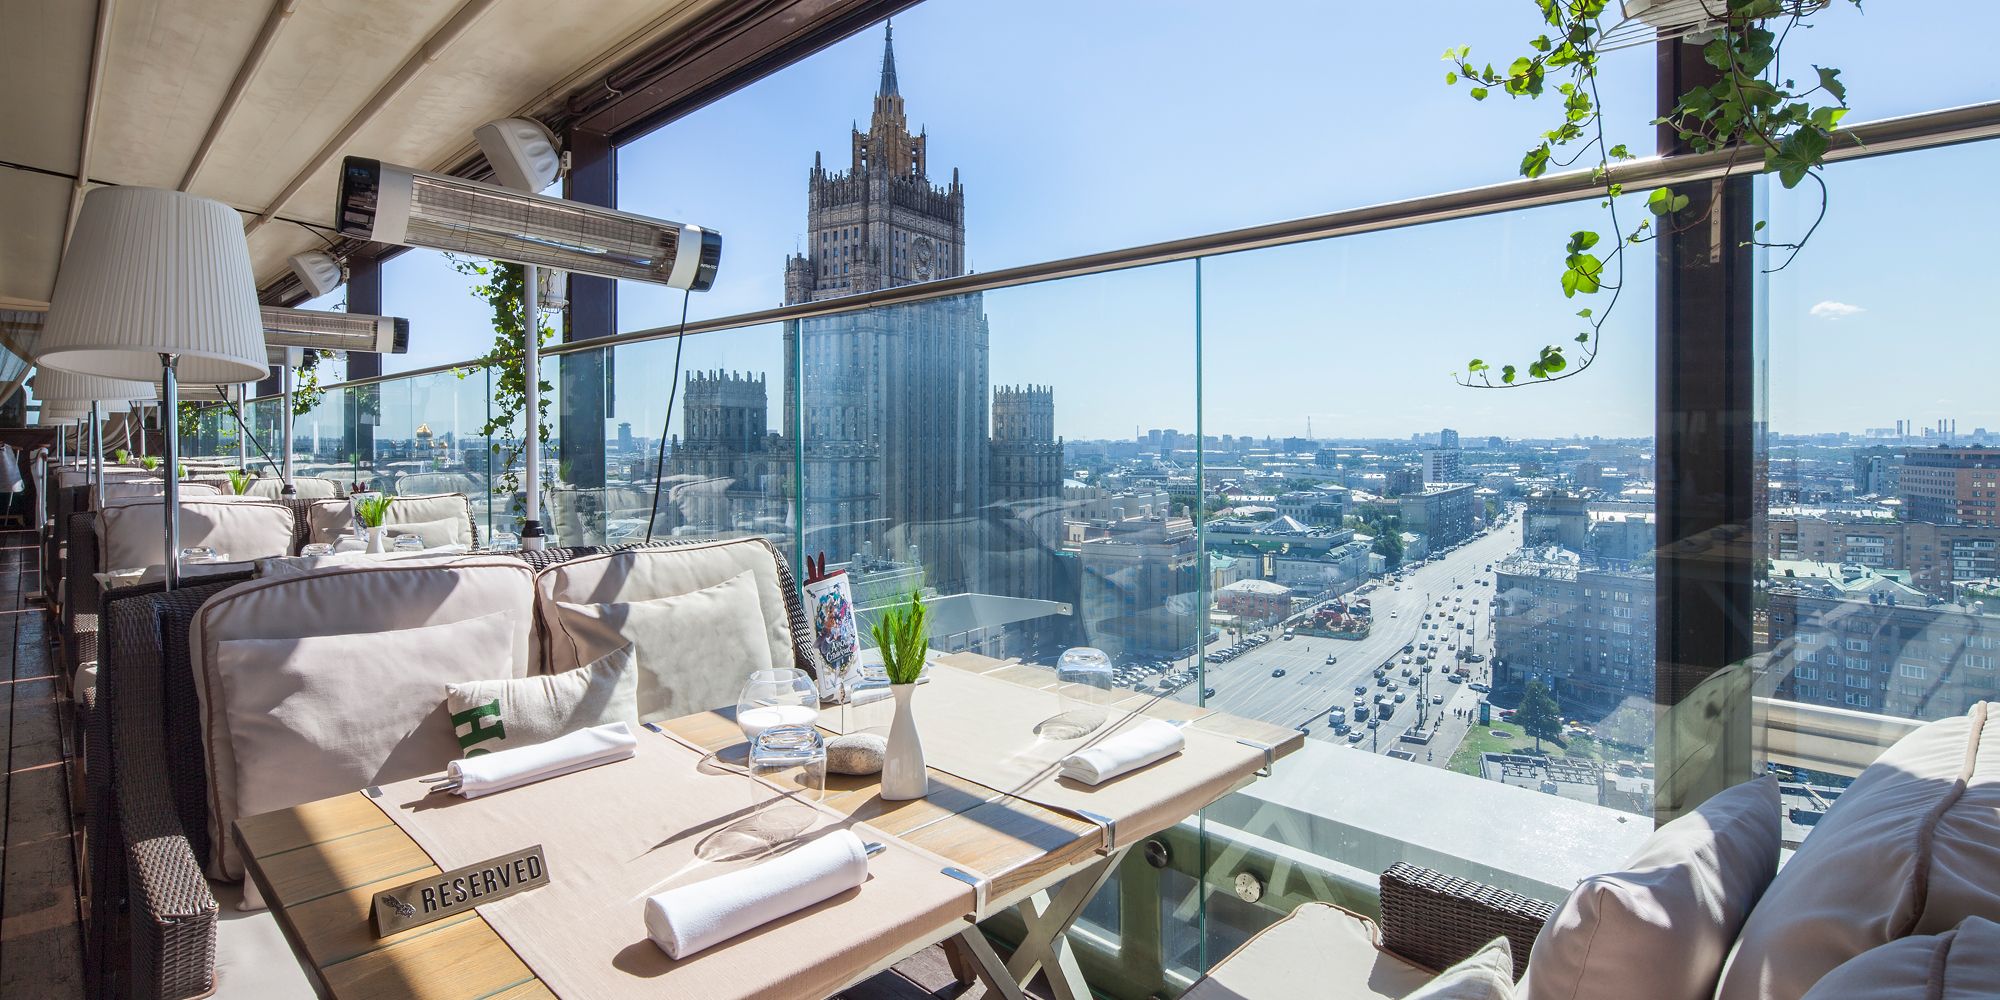 Moscow restaurant named among world’s best by British magazine